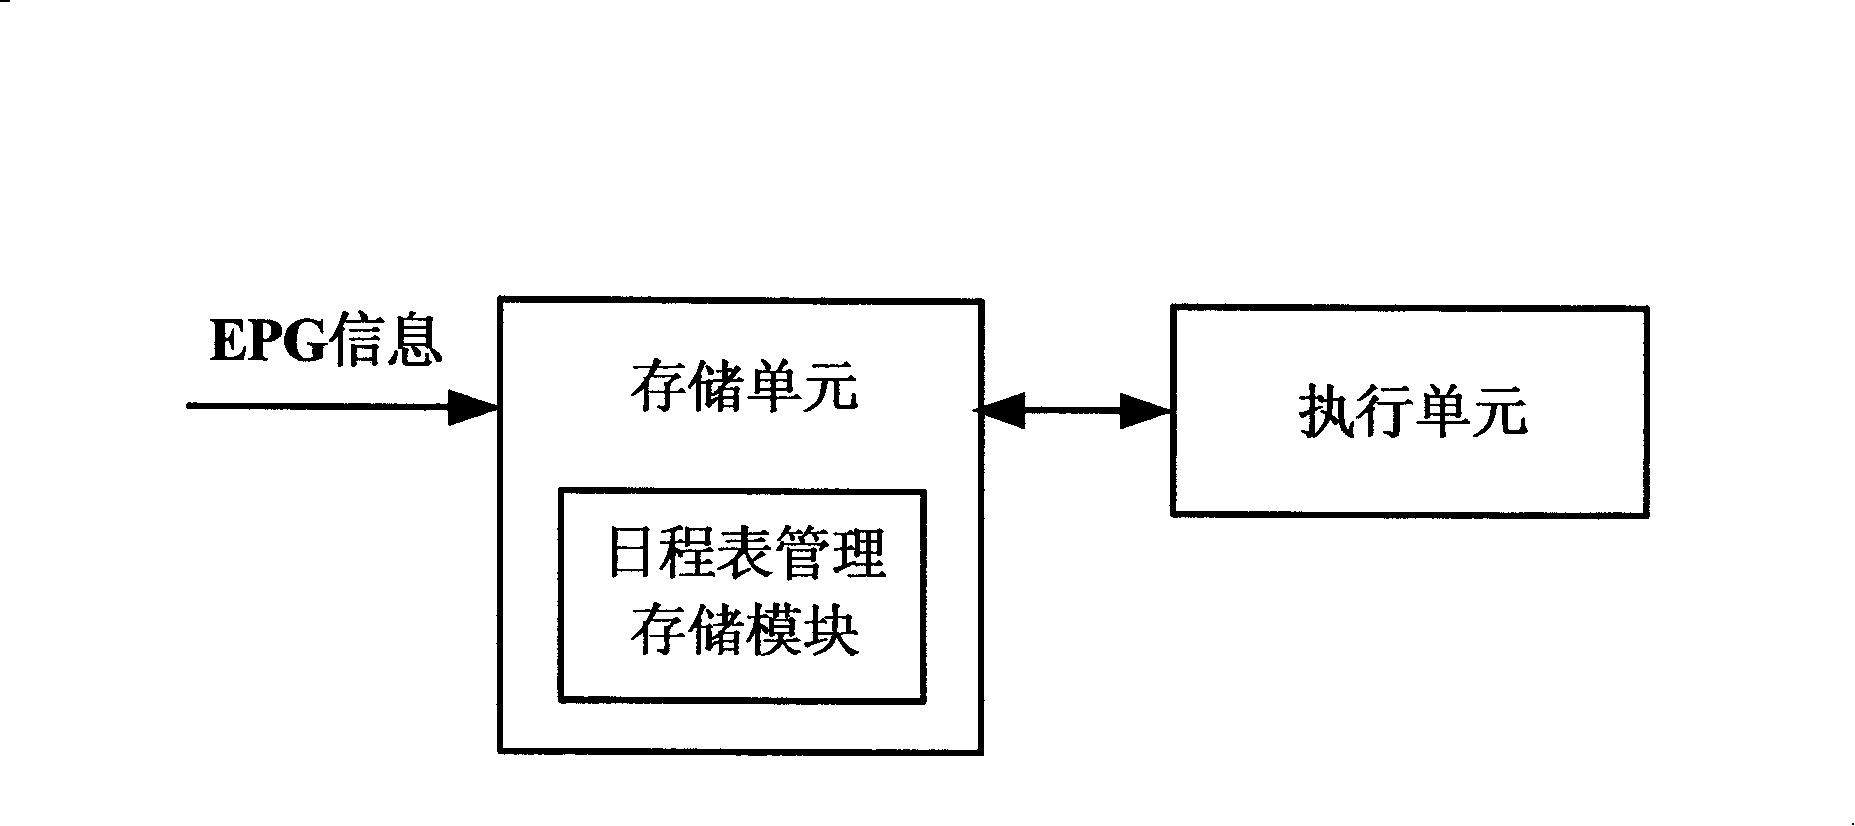 Mobile terminal and method for reminding of watching television program